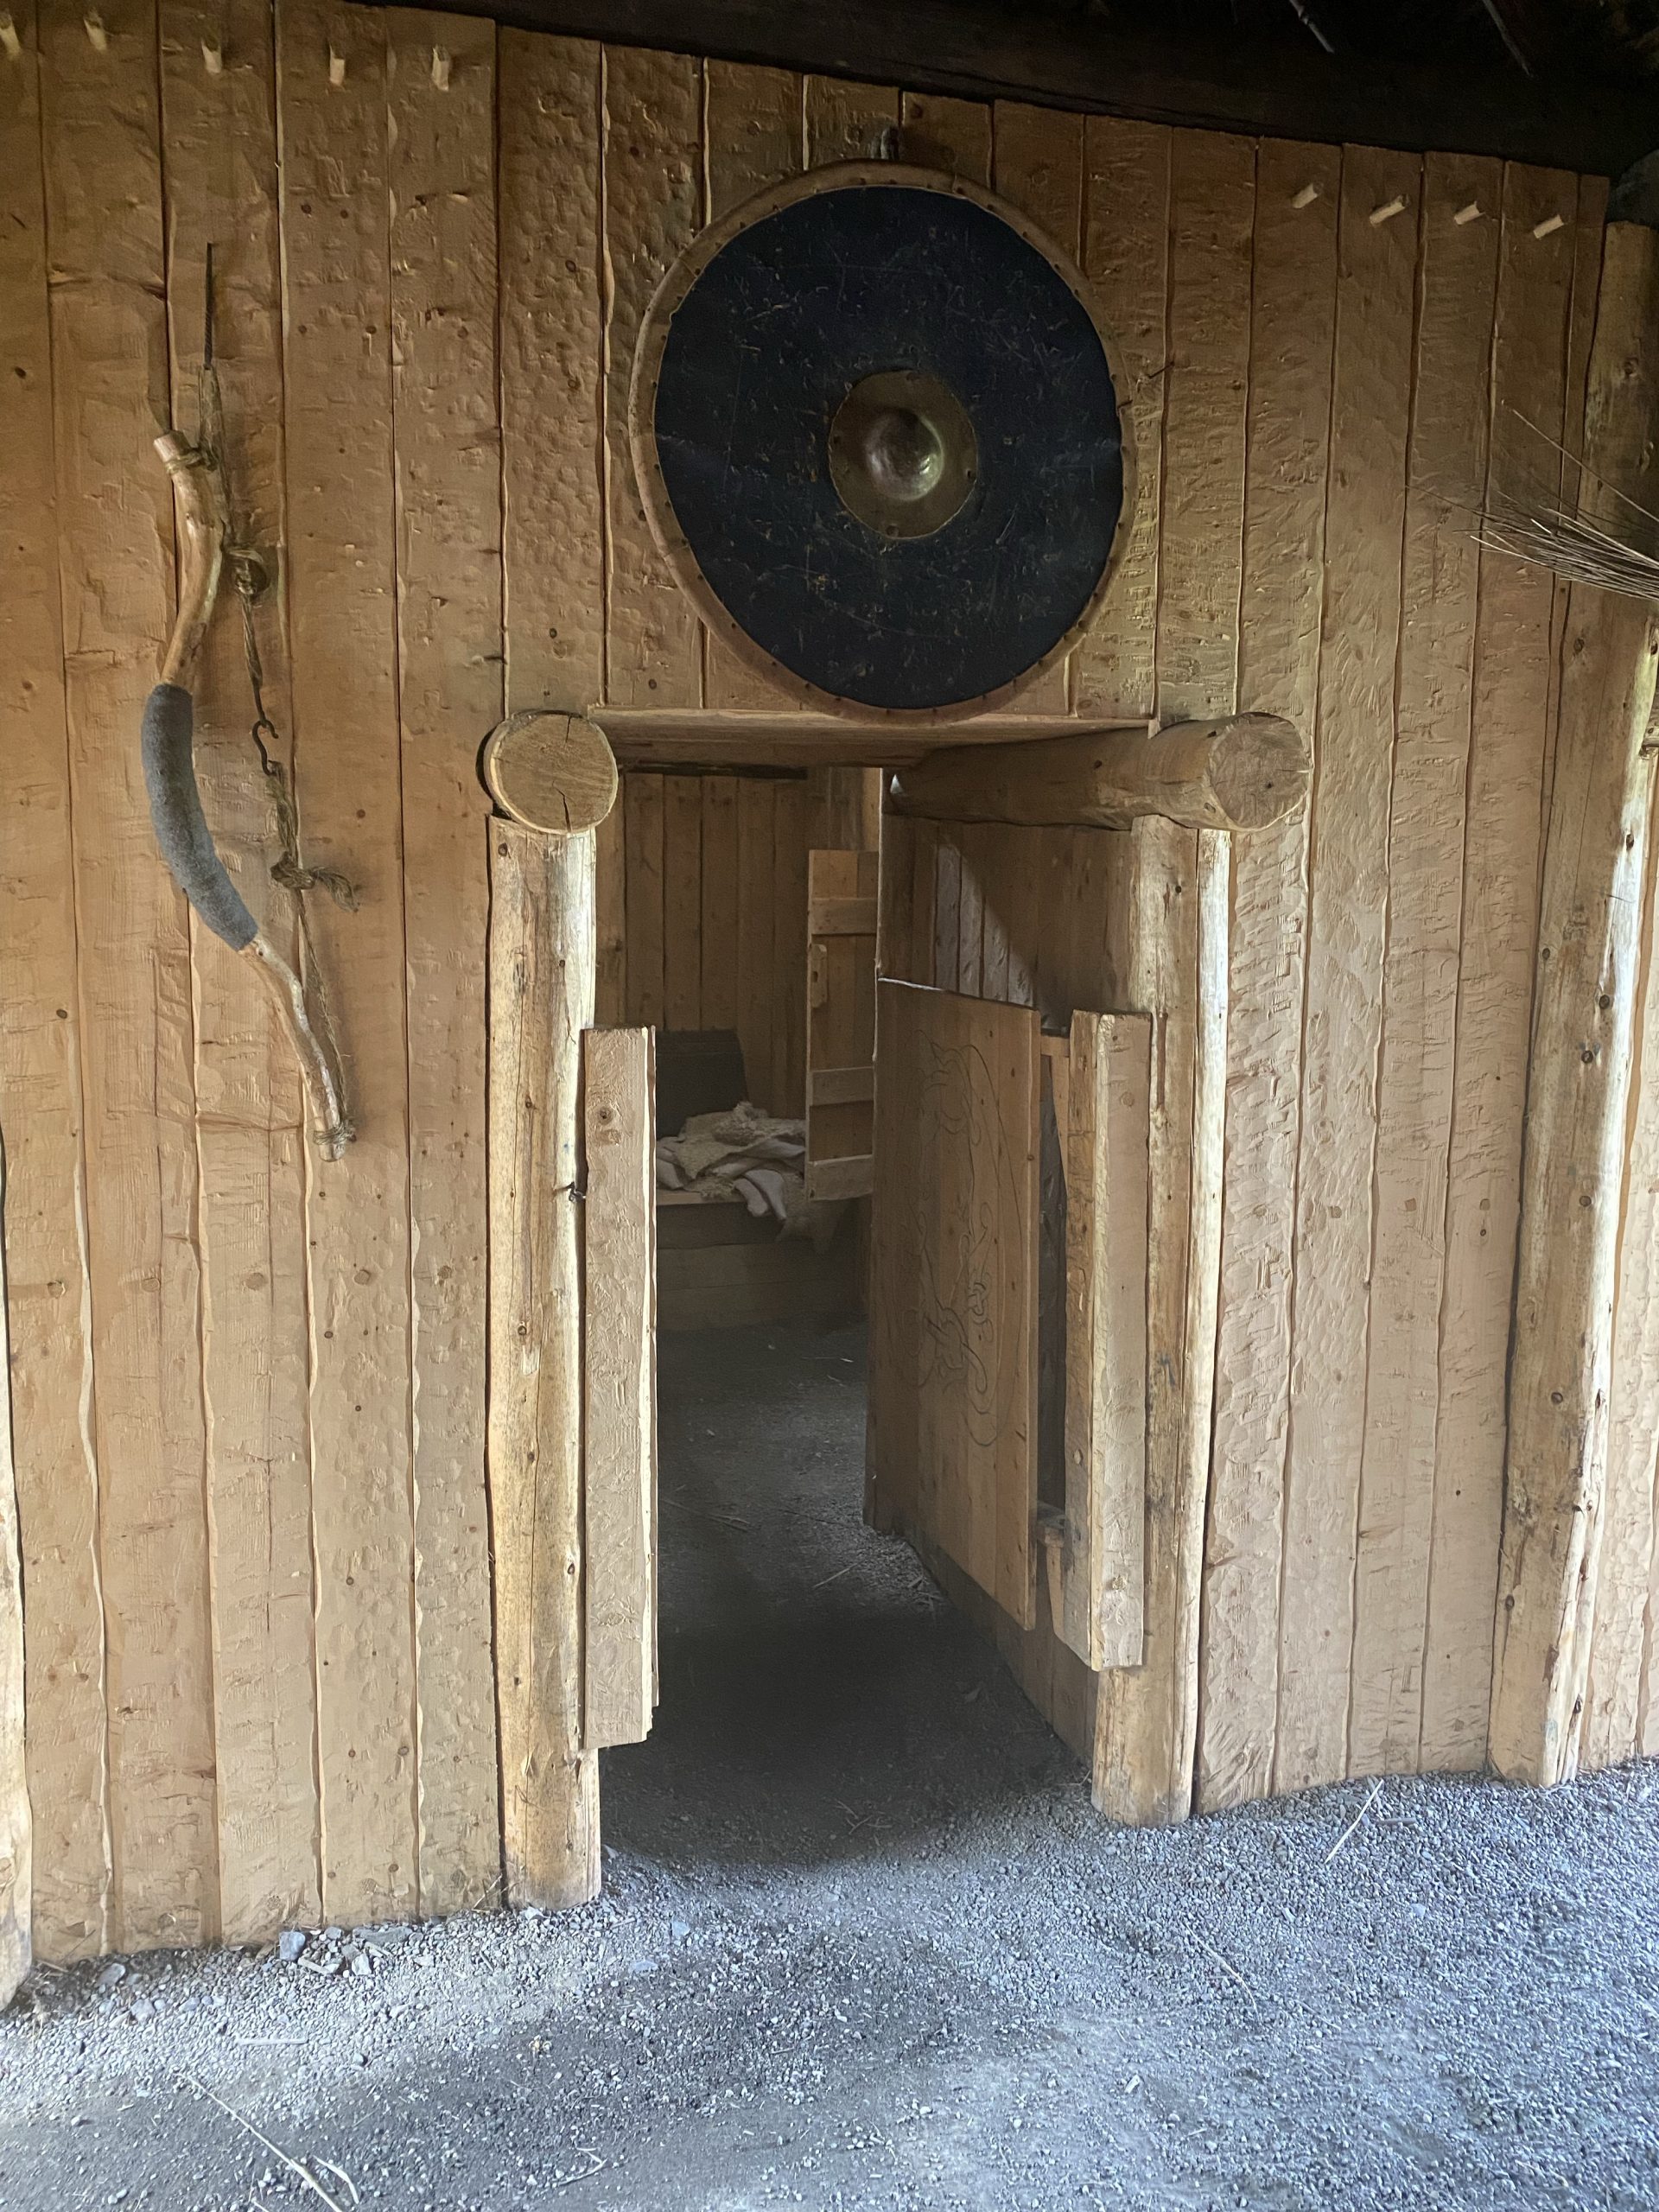 An interior doorway to a few sleeping quarters in a re-creation of a 1,000 year old Norse sod house.